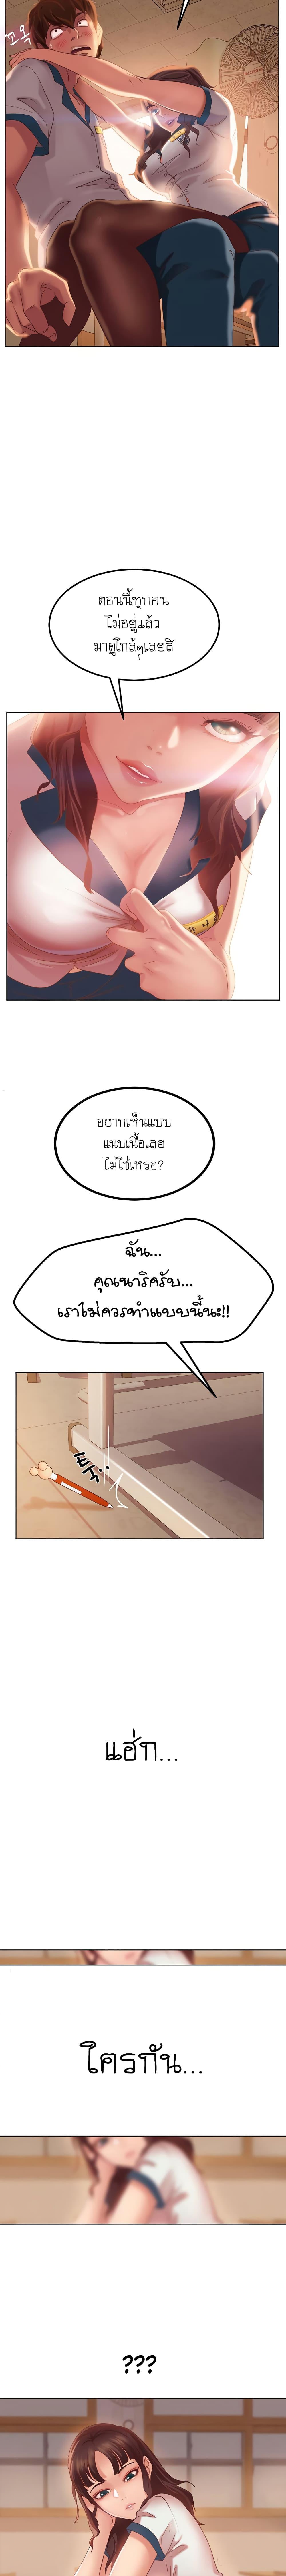 A Twisted Day 1 ภาพ 15